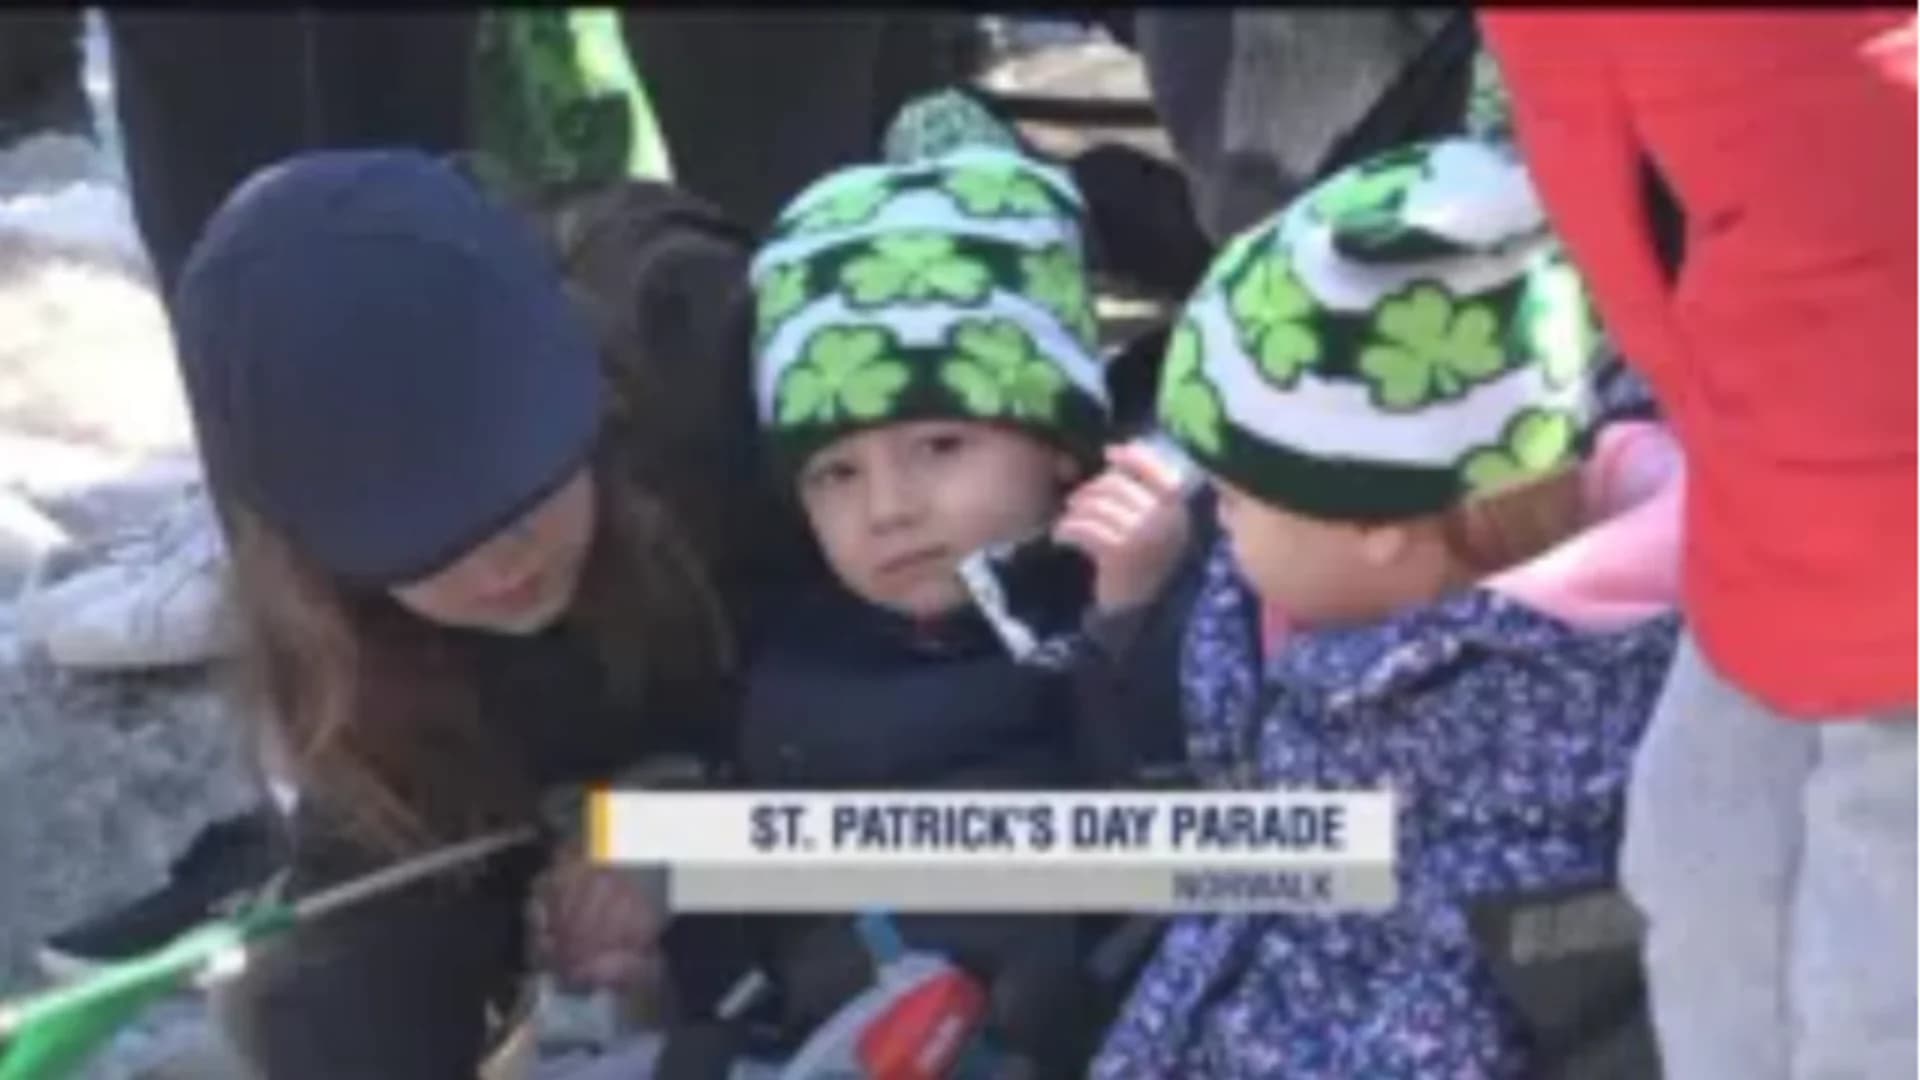 Norwalk welcomes herd of people for city’s annual St. Patrick’s Day parade